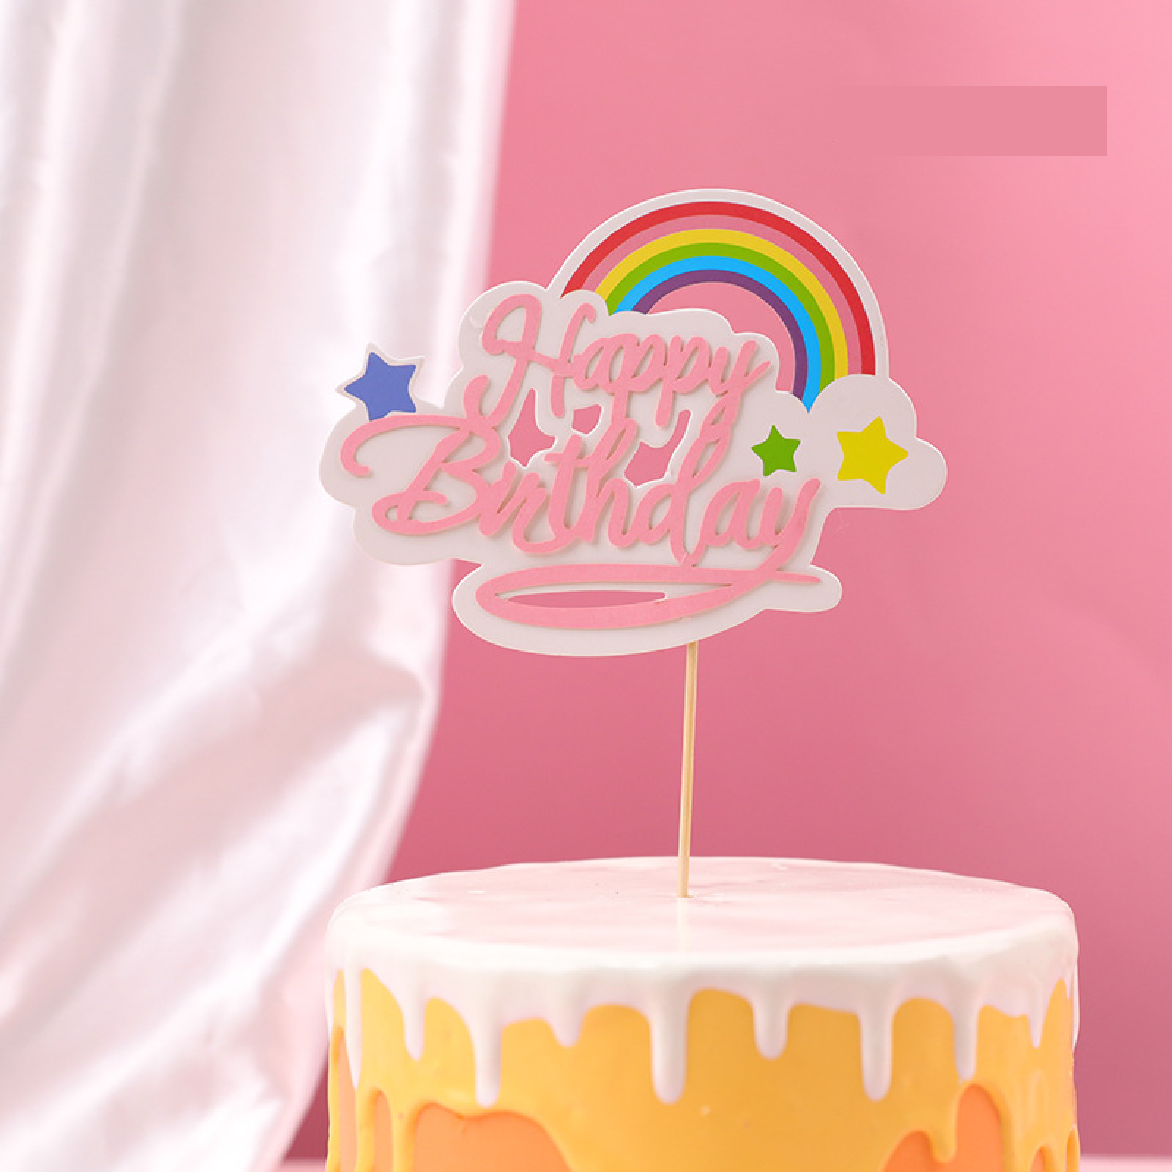 Cake Topper Cake Decoration - 'Happy Birthday' with rainbow and stars - pink - Rampant Coffee Company